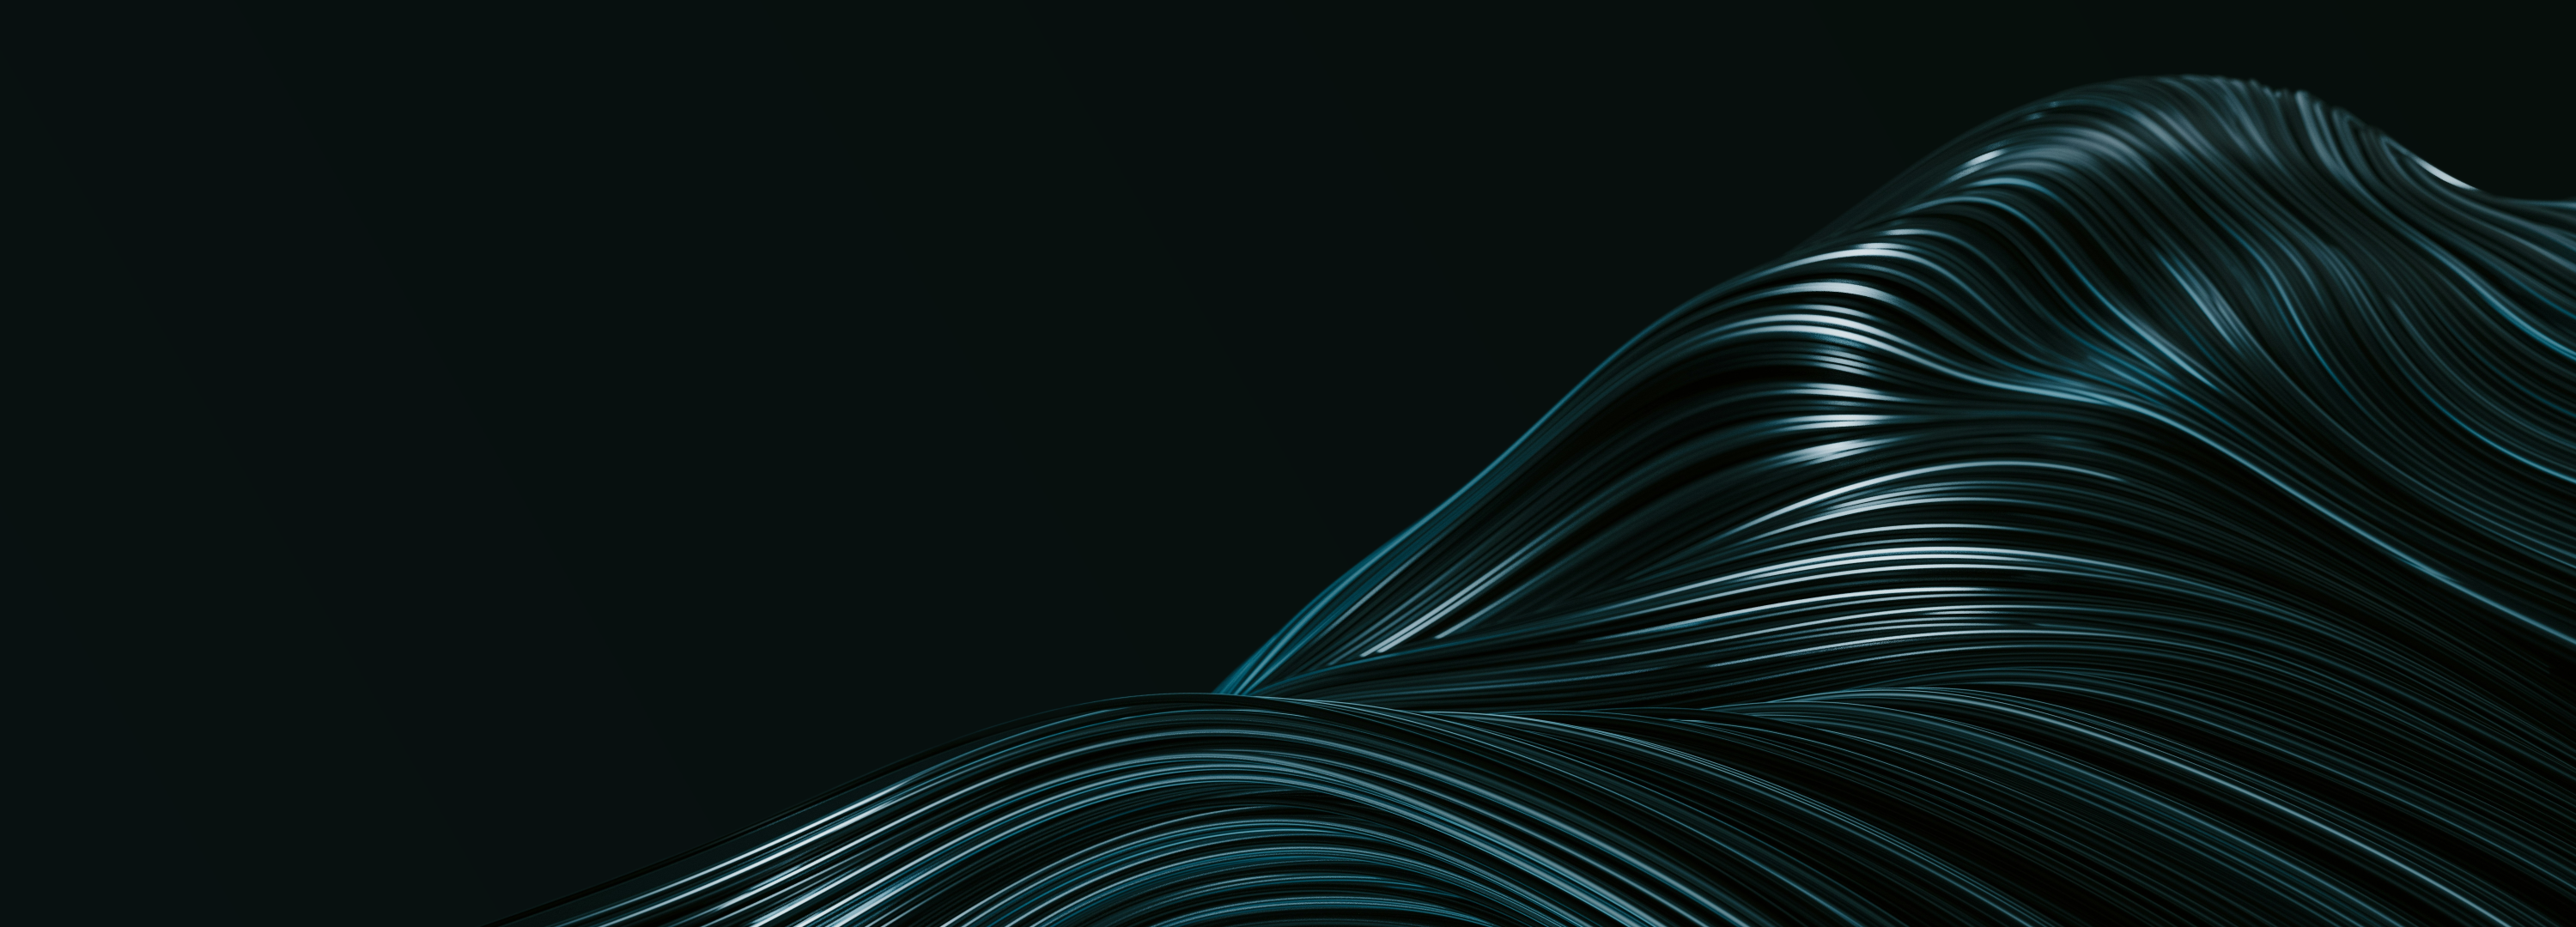 a black and blue background with lines